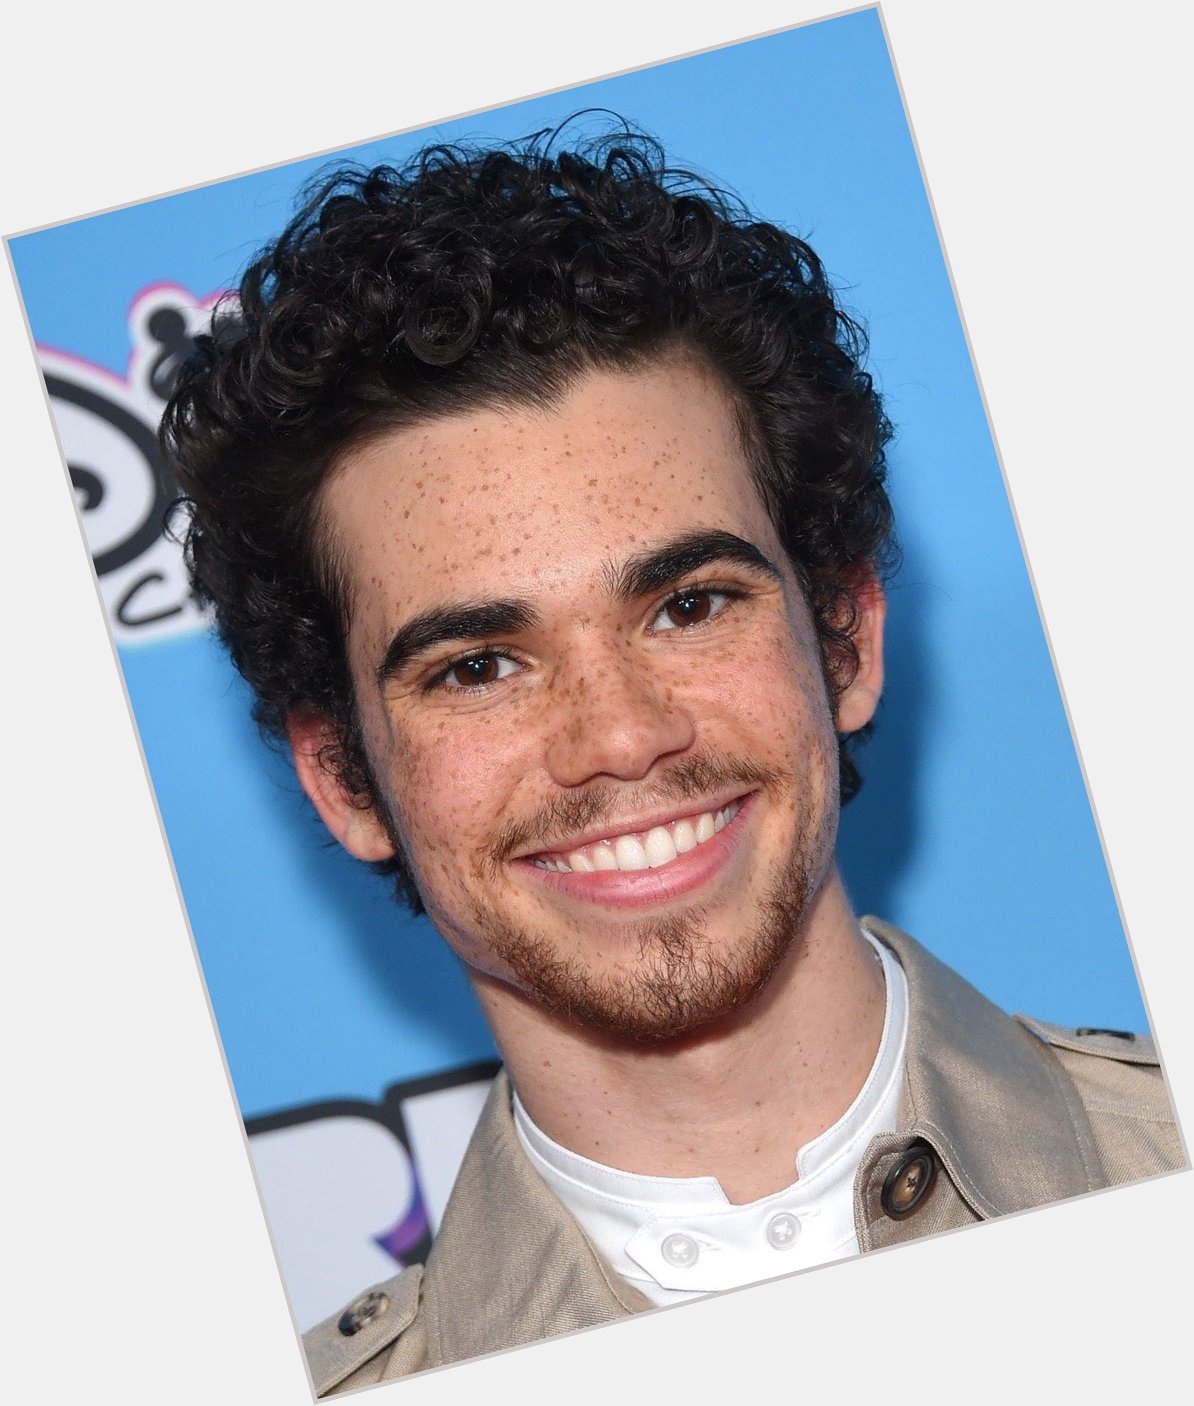 Happy birthday Cameron Boyce. He was a amazing actor and was taken way to quick. 